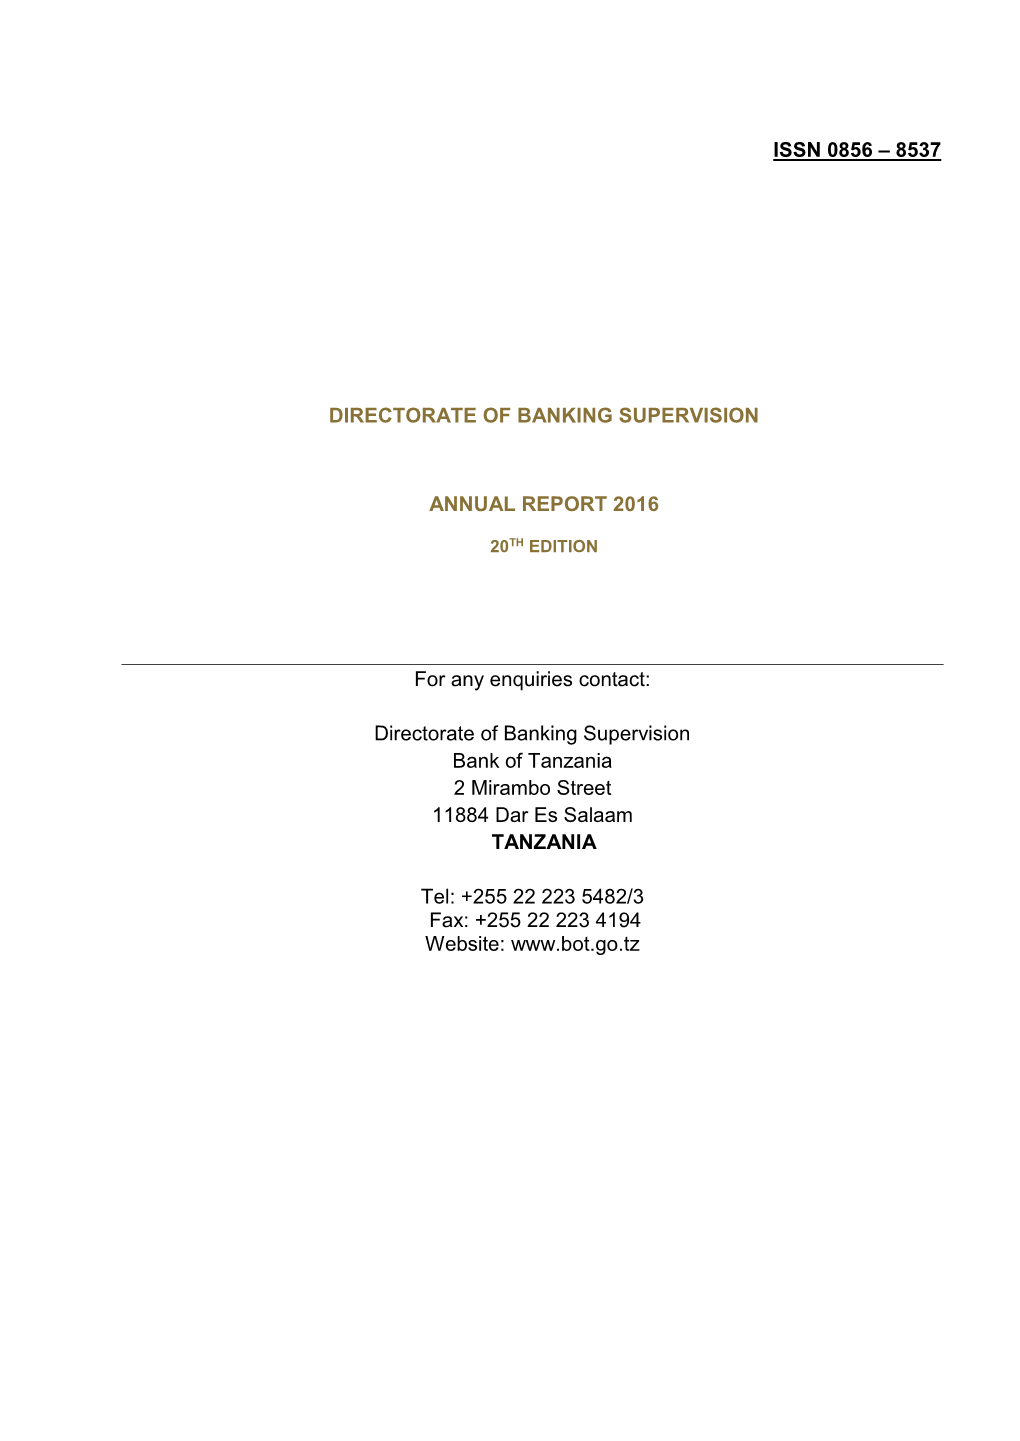 Directorate of Banking Supervision Annual Report 2016